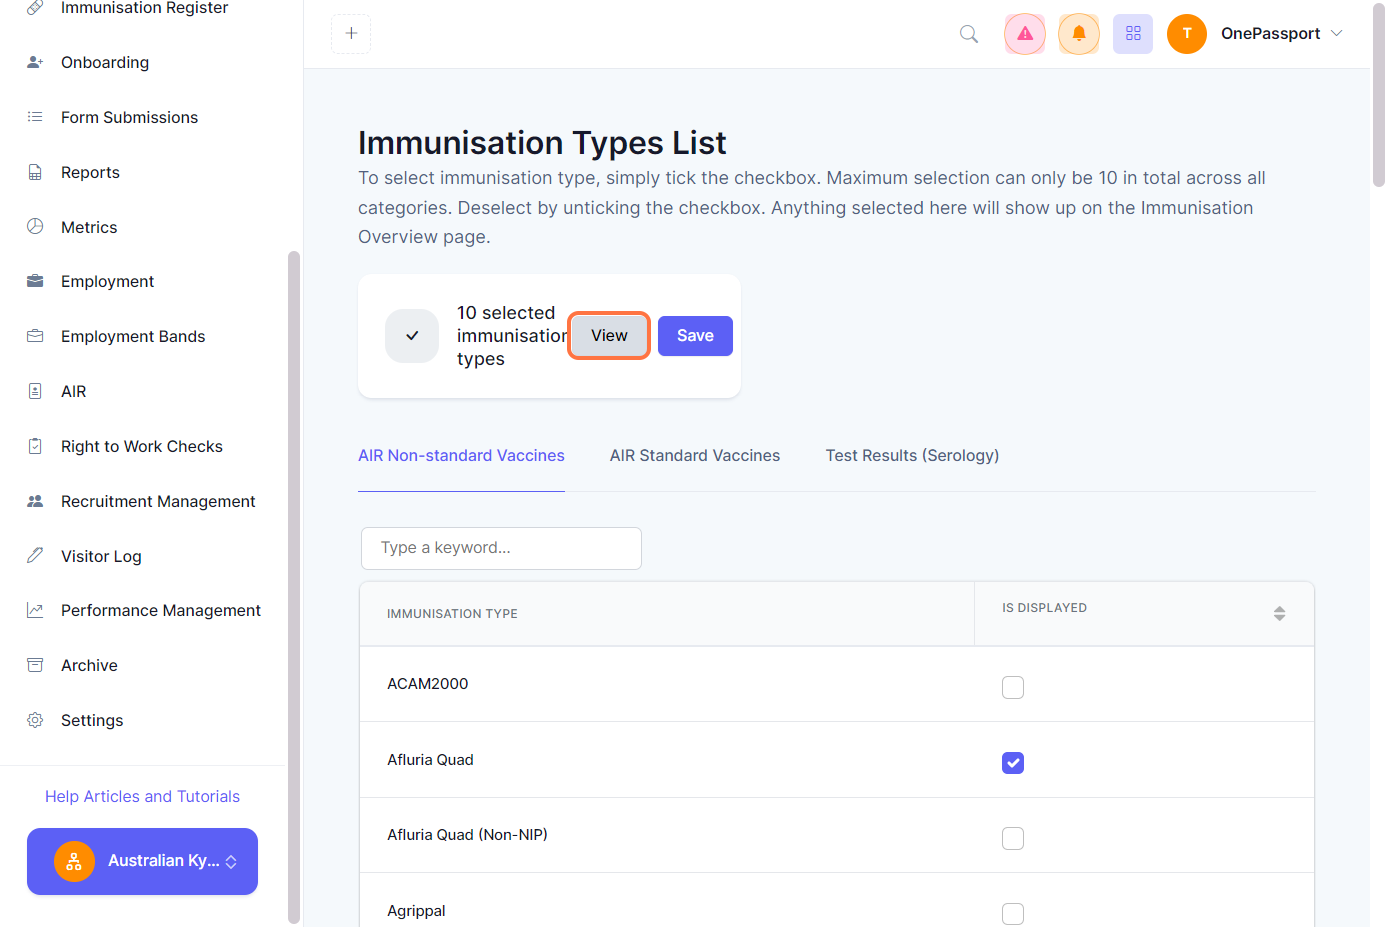 Clicking View button will open the list of immunisation types that are selected. You can only select up to 10 types.